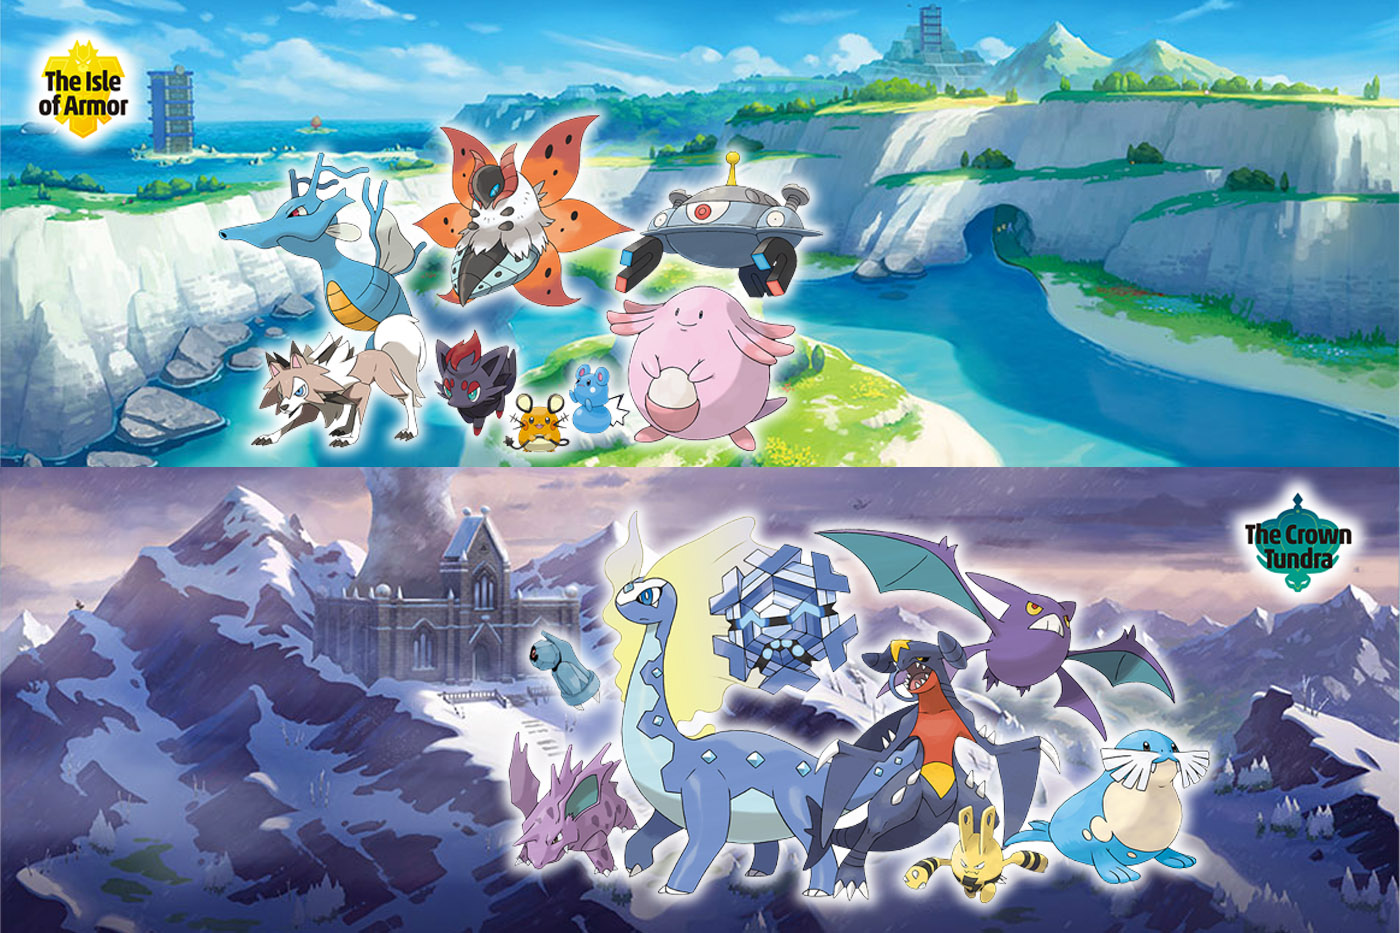 How to get to the Isle of Armor in Pokemon Sword and Shield